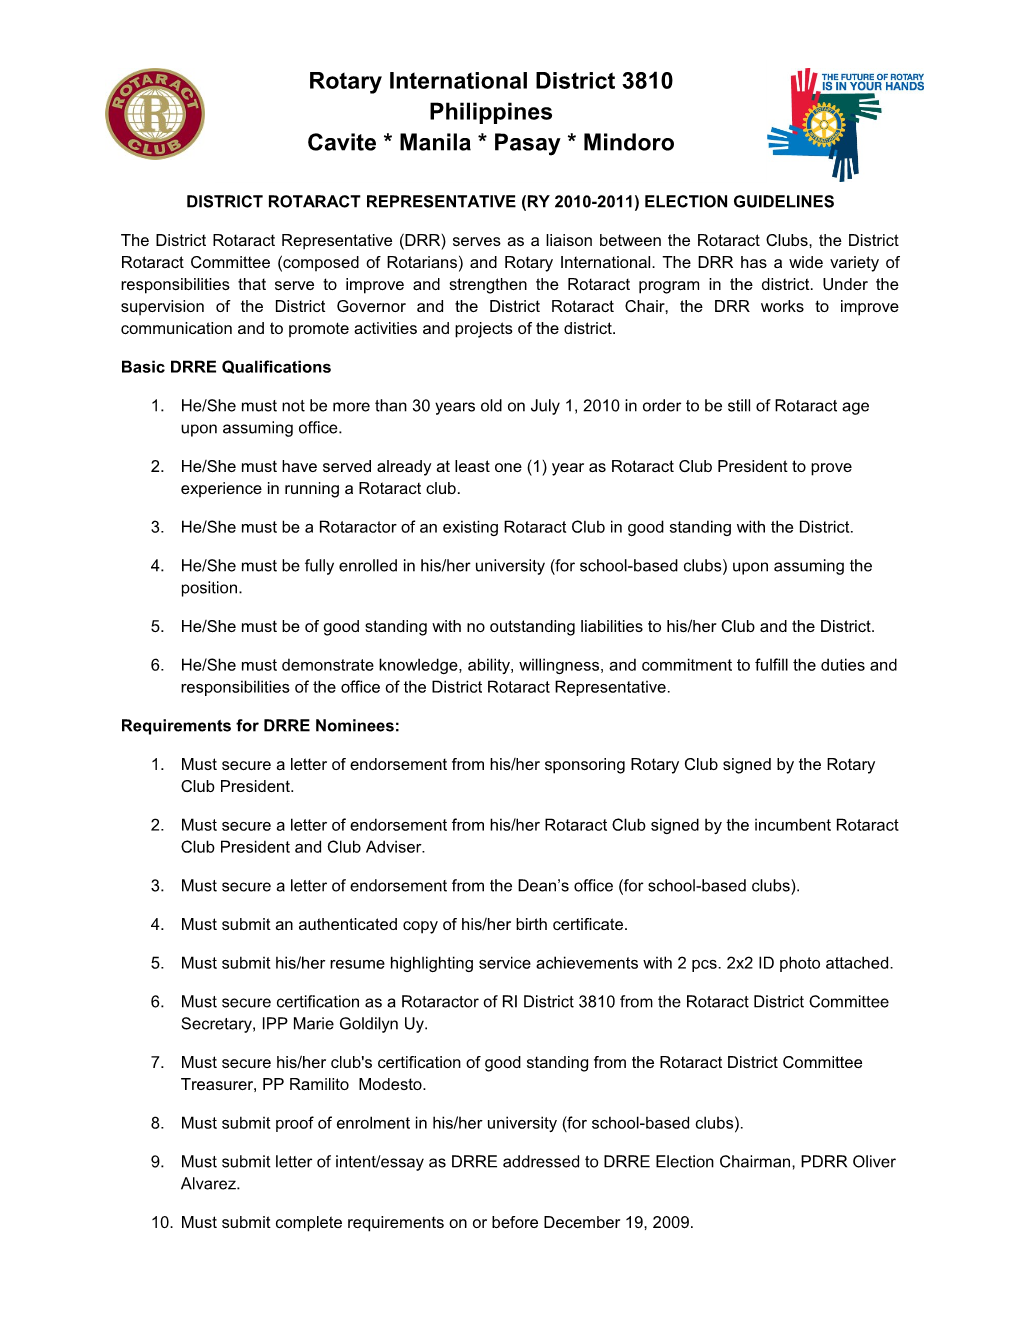 District Rotaract Representative (Ry 2010-2011) Election Guidelines